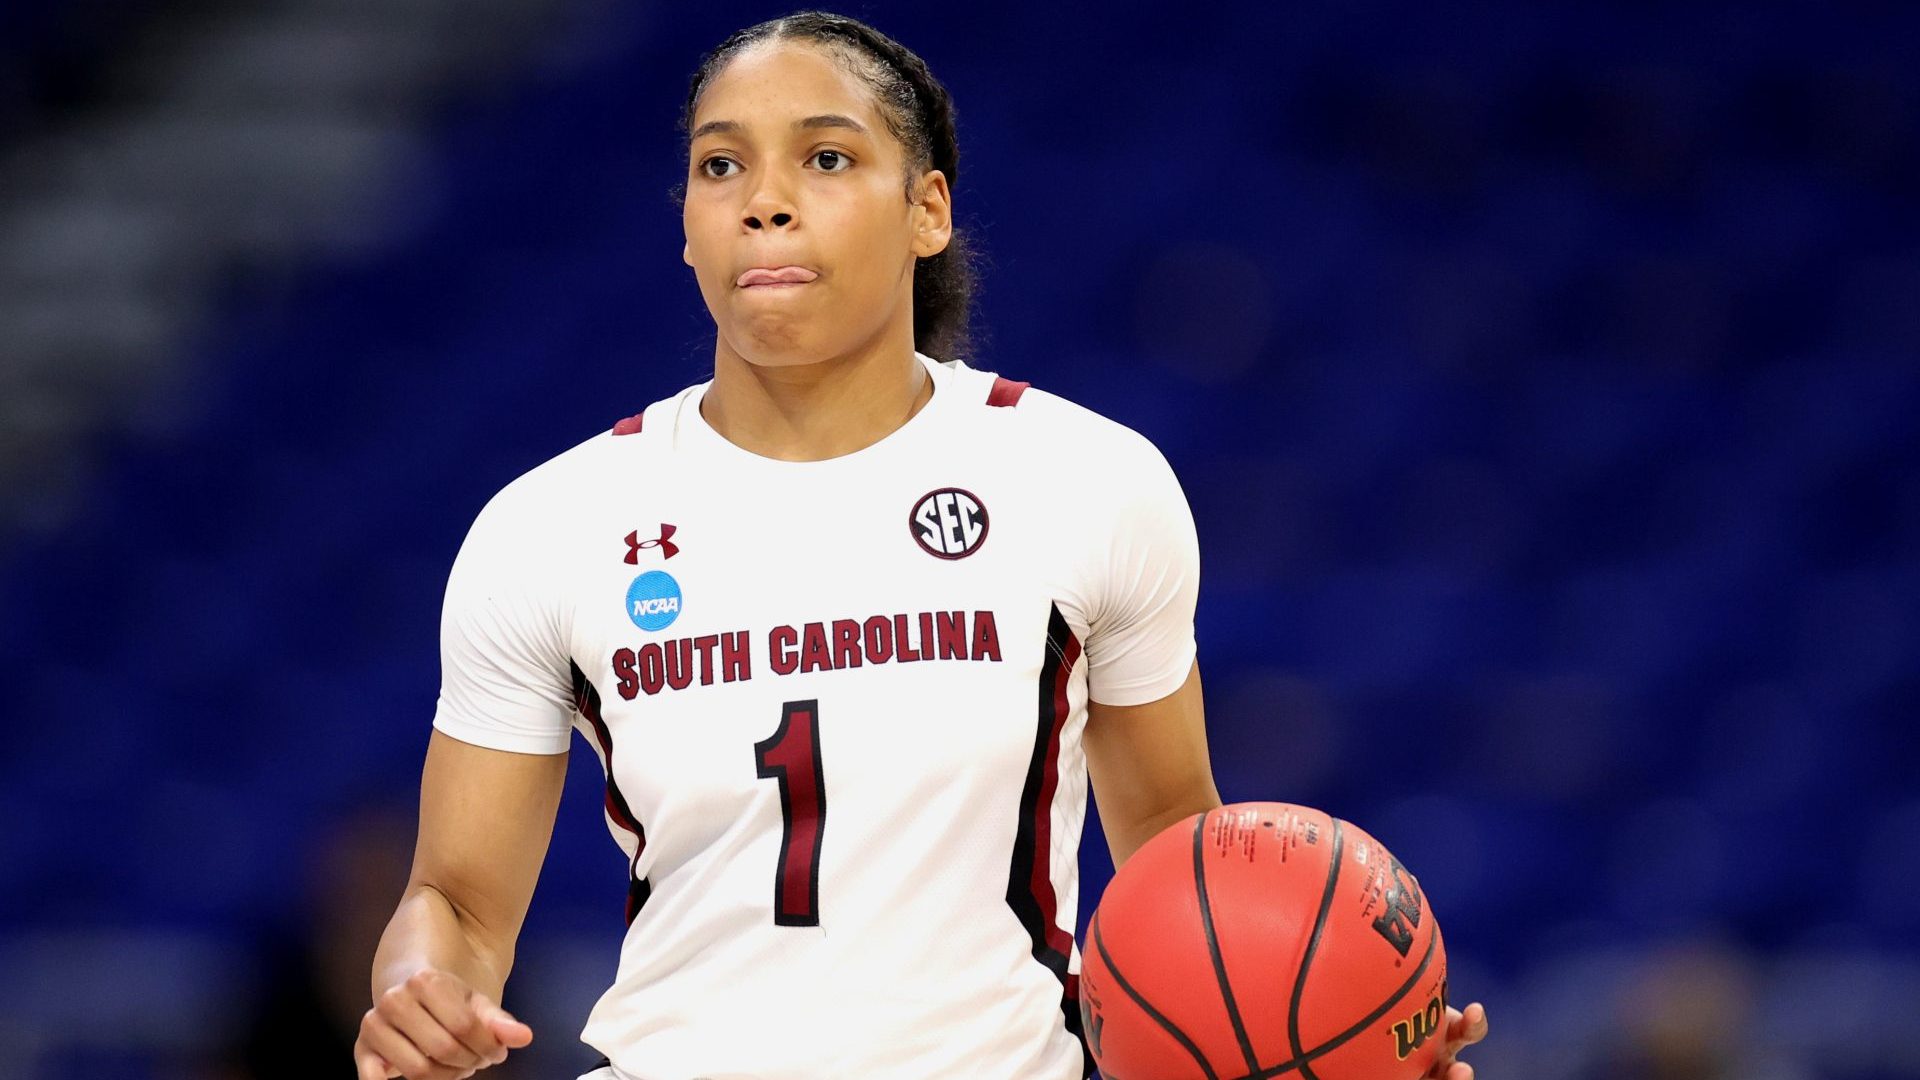 South Carolina women open NCAA with Staley’s 500th win – college basketball